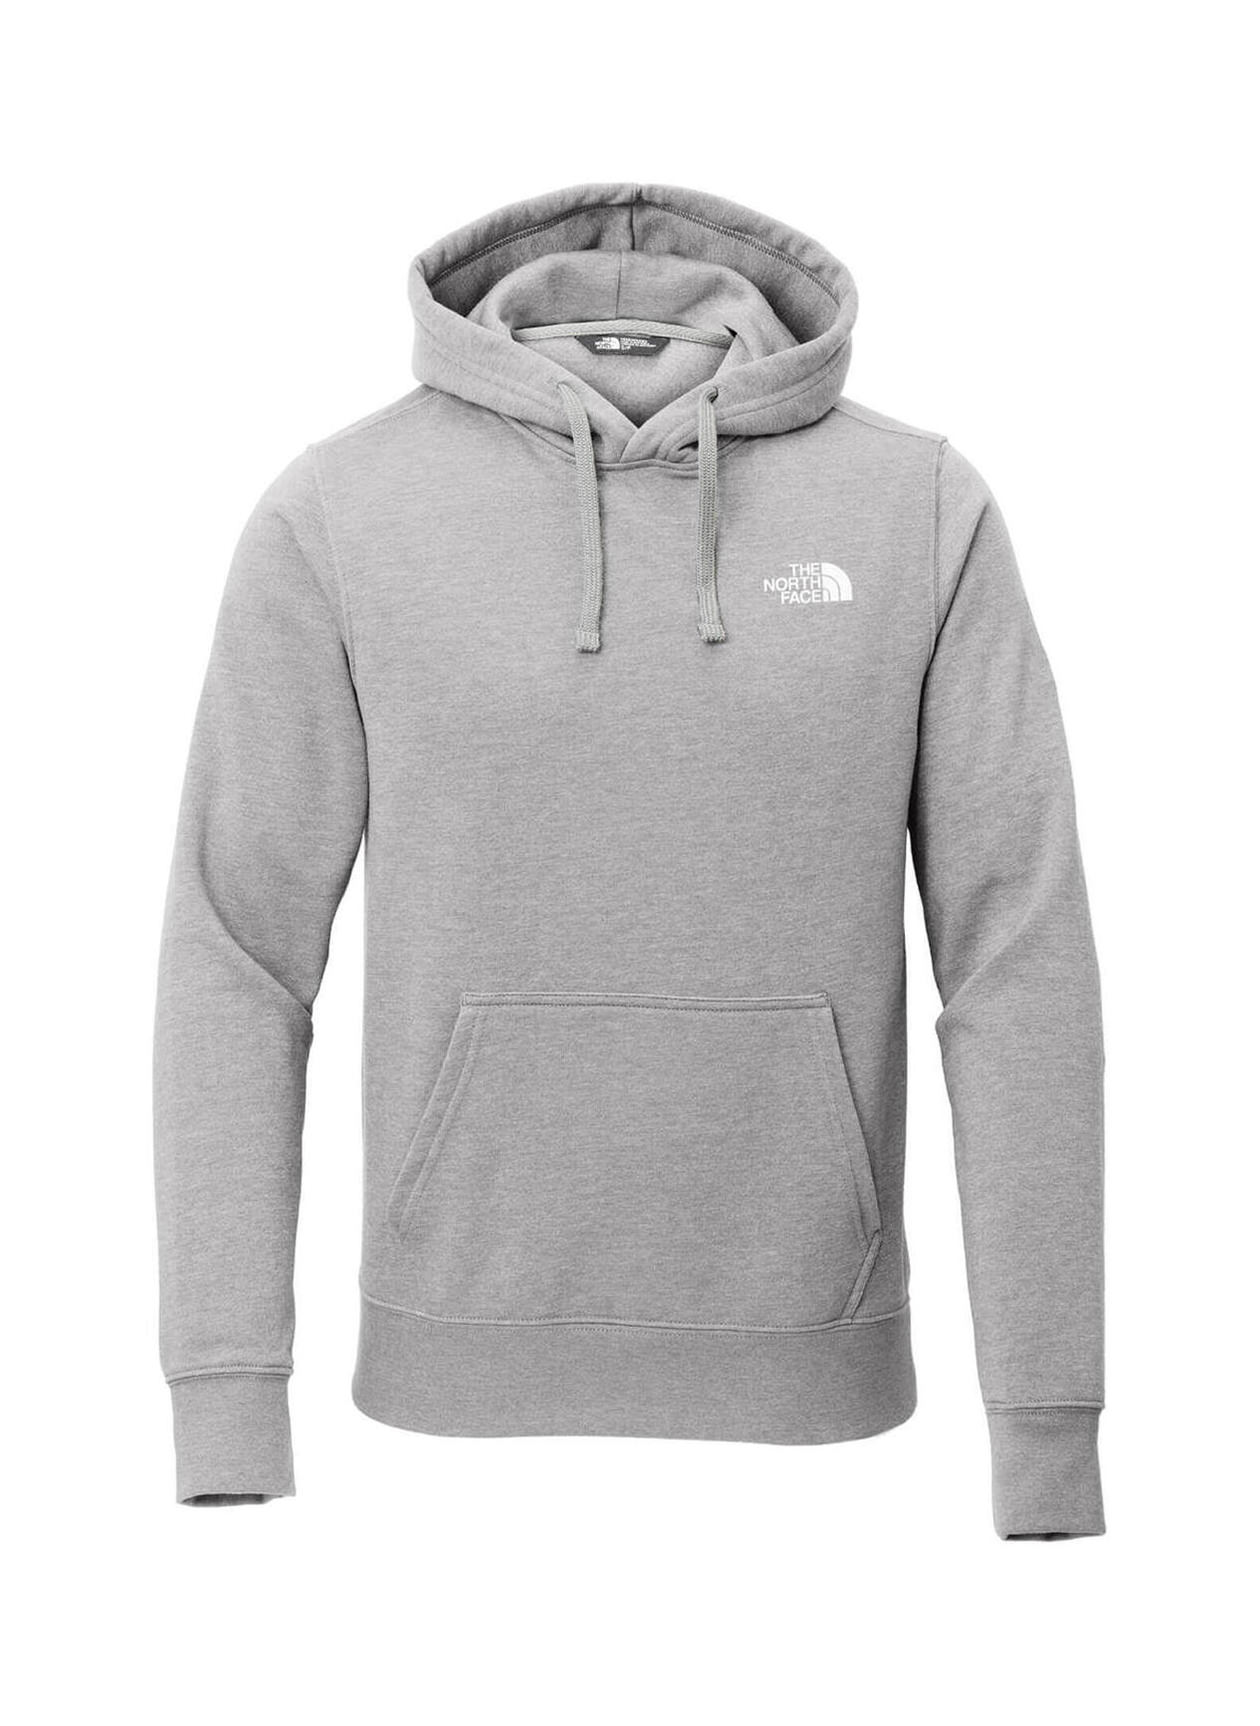 The North Face Men's TNF Light Grey Heather Pullover Hoodie